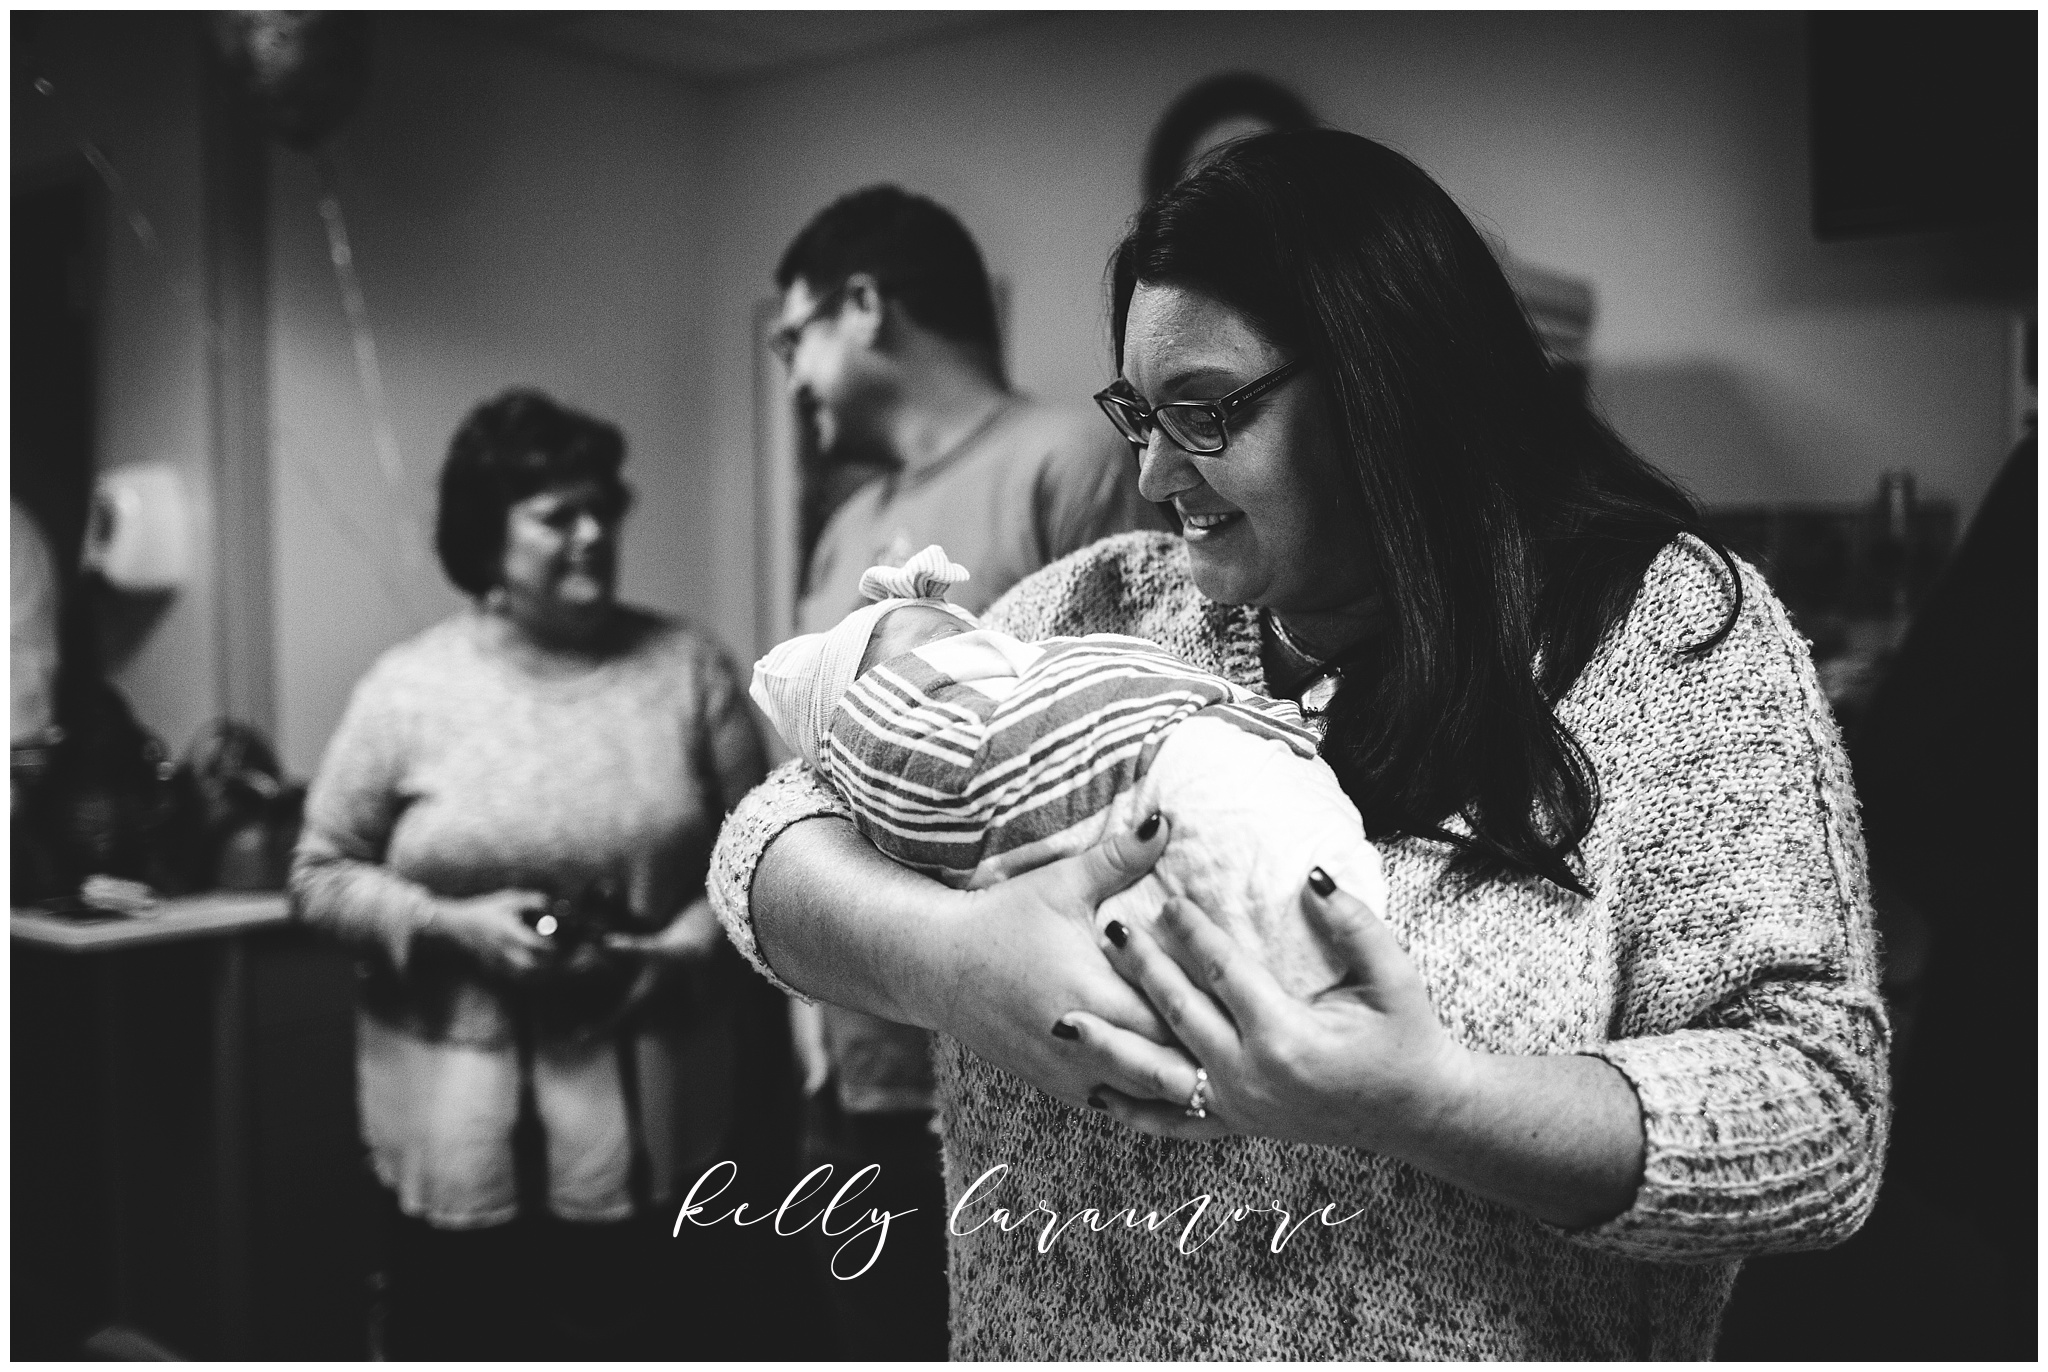 st louis birth story photographer, st louis family photographer, missouri baptist birth center birth, delivery room, quiet moments